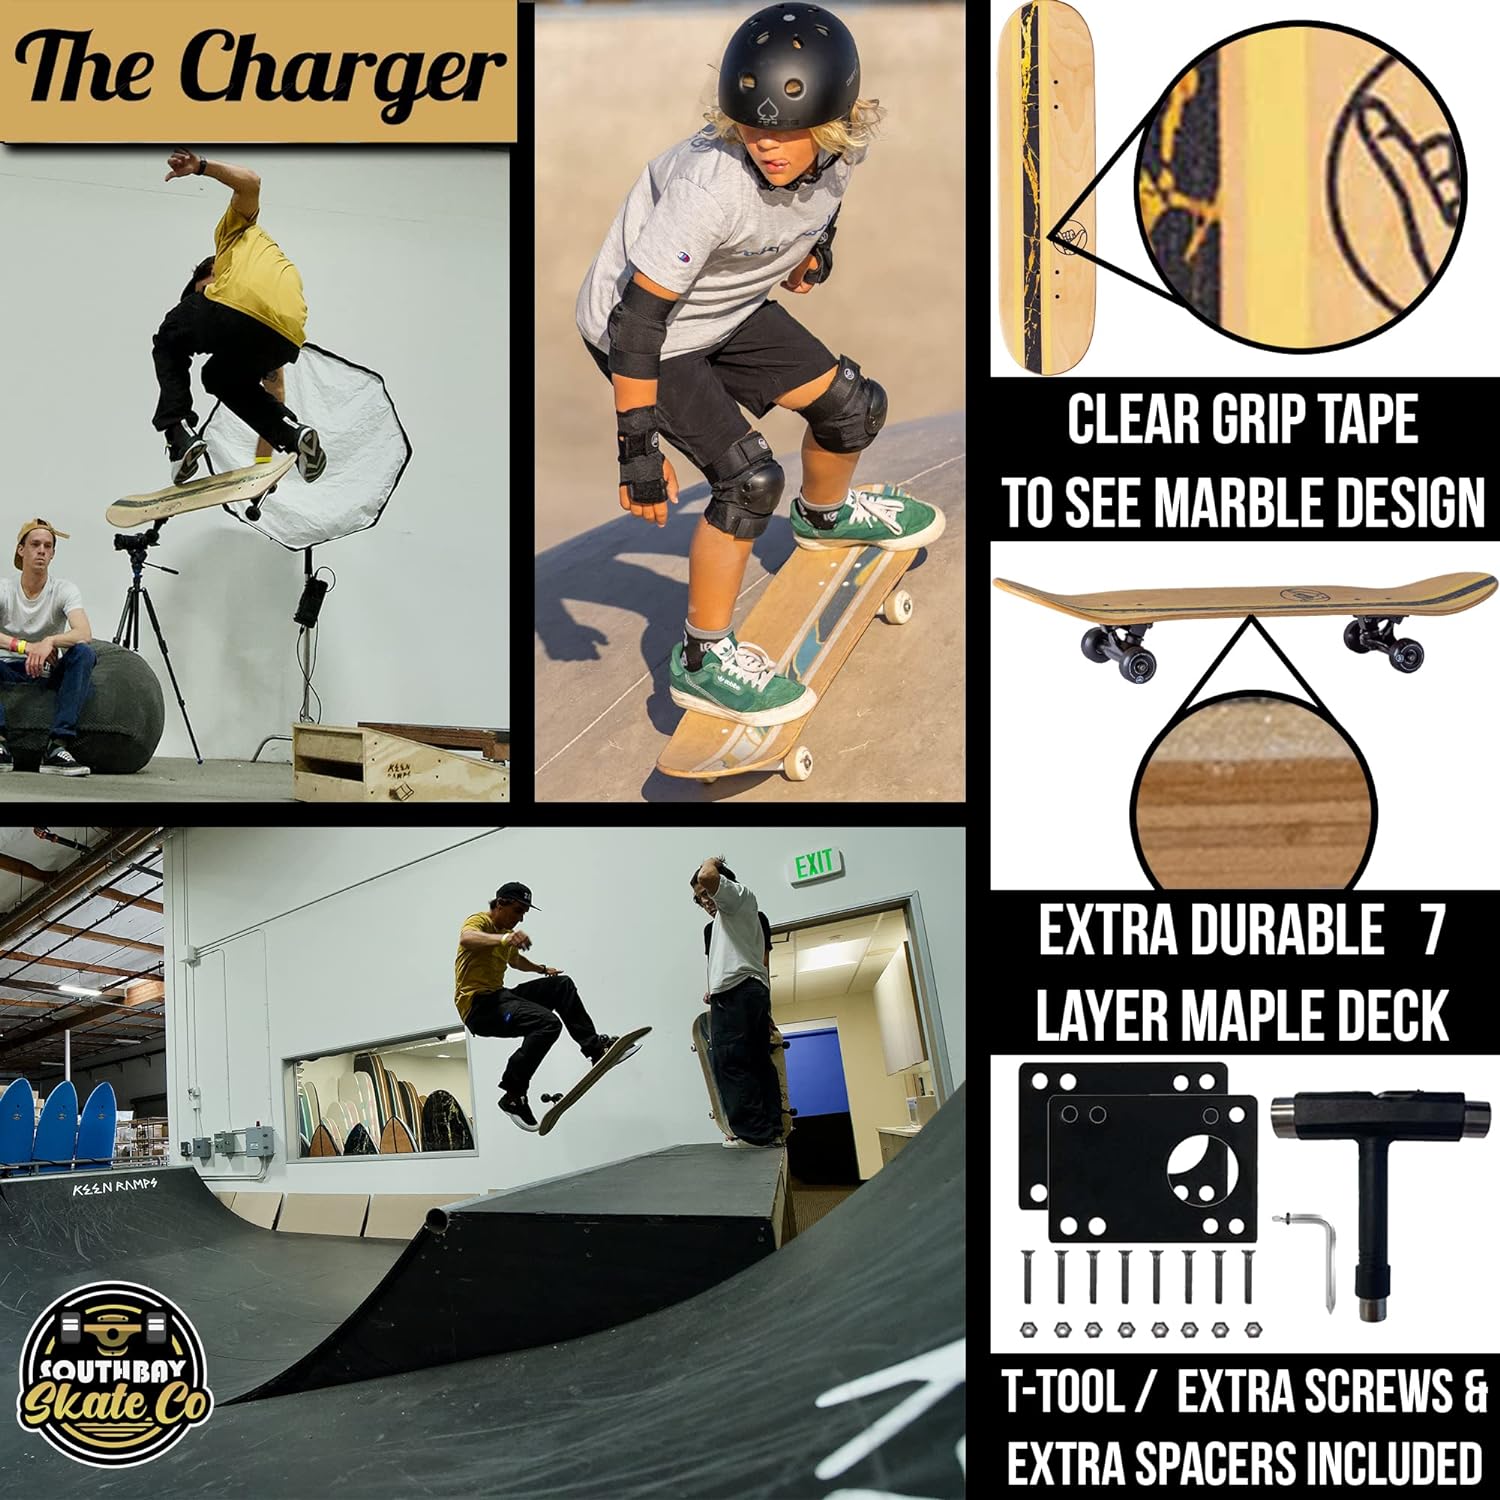 South Bay Skate Co™ - Premium Skateboards for Beginners - 31.75” x 8.25” Charger Skateboard - Performance Trick Skate Board Shape for Adults, Teens  Kids - 100% Pre-Assembled - Clear Grip Tape Deck